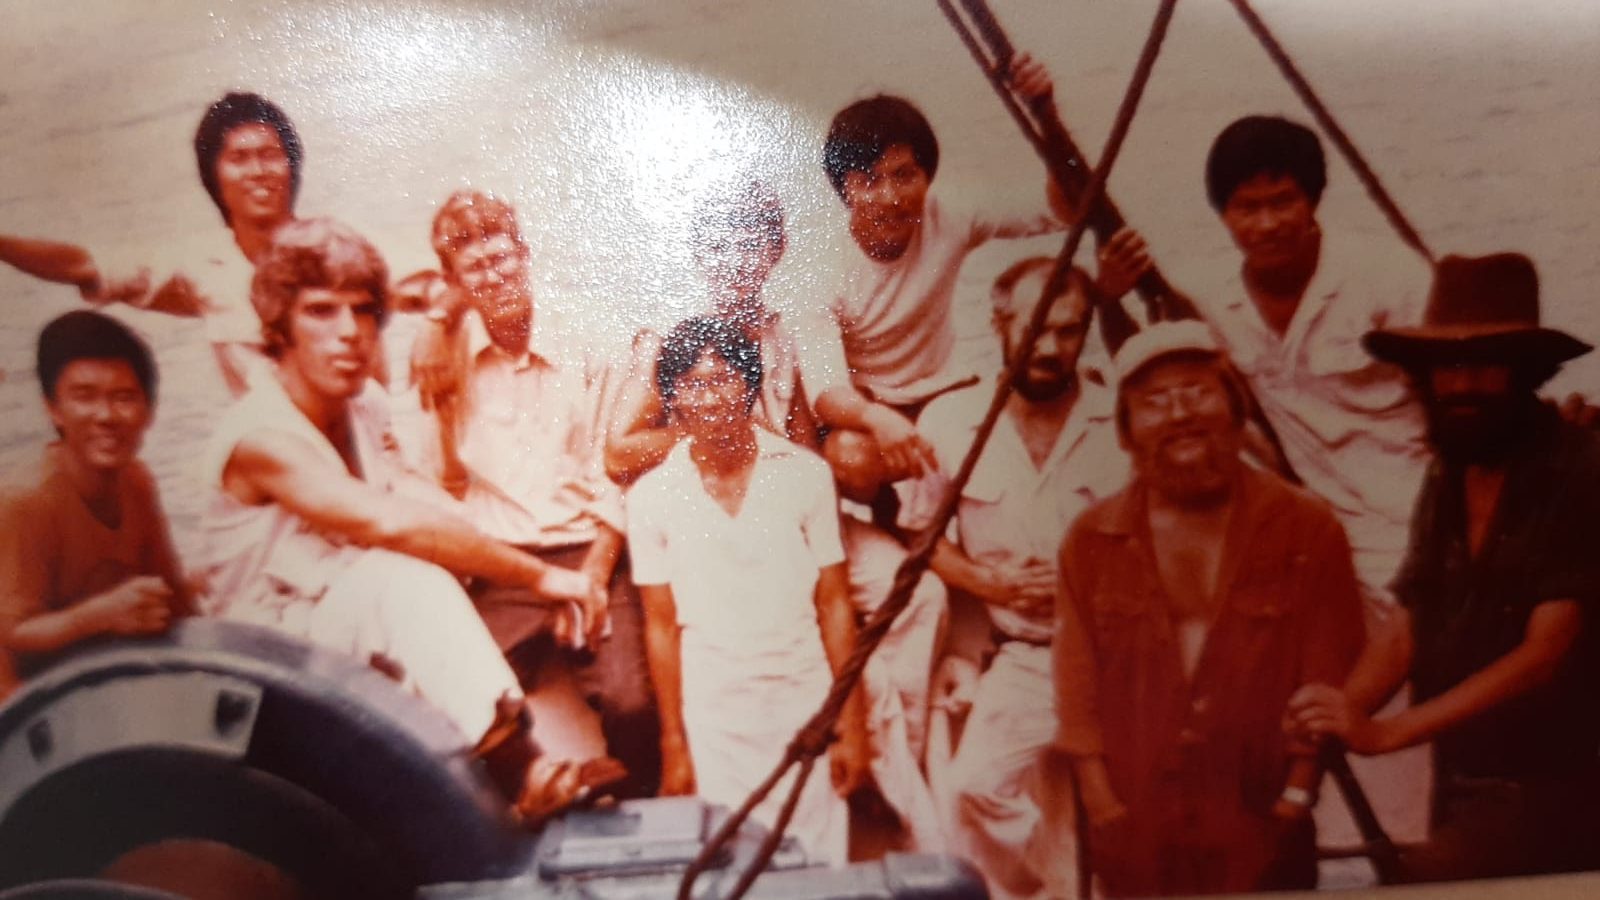 Rev Lai (extreme right) as a deckhand with the rest of the deck crew. Photo courtesy of Rev Keith Lai.